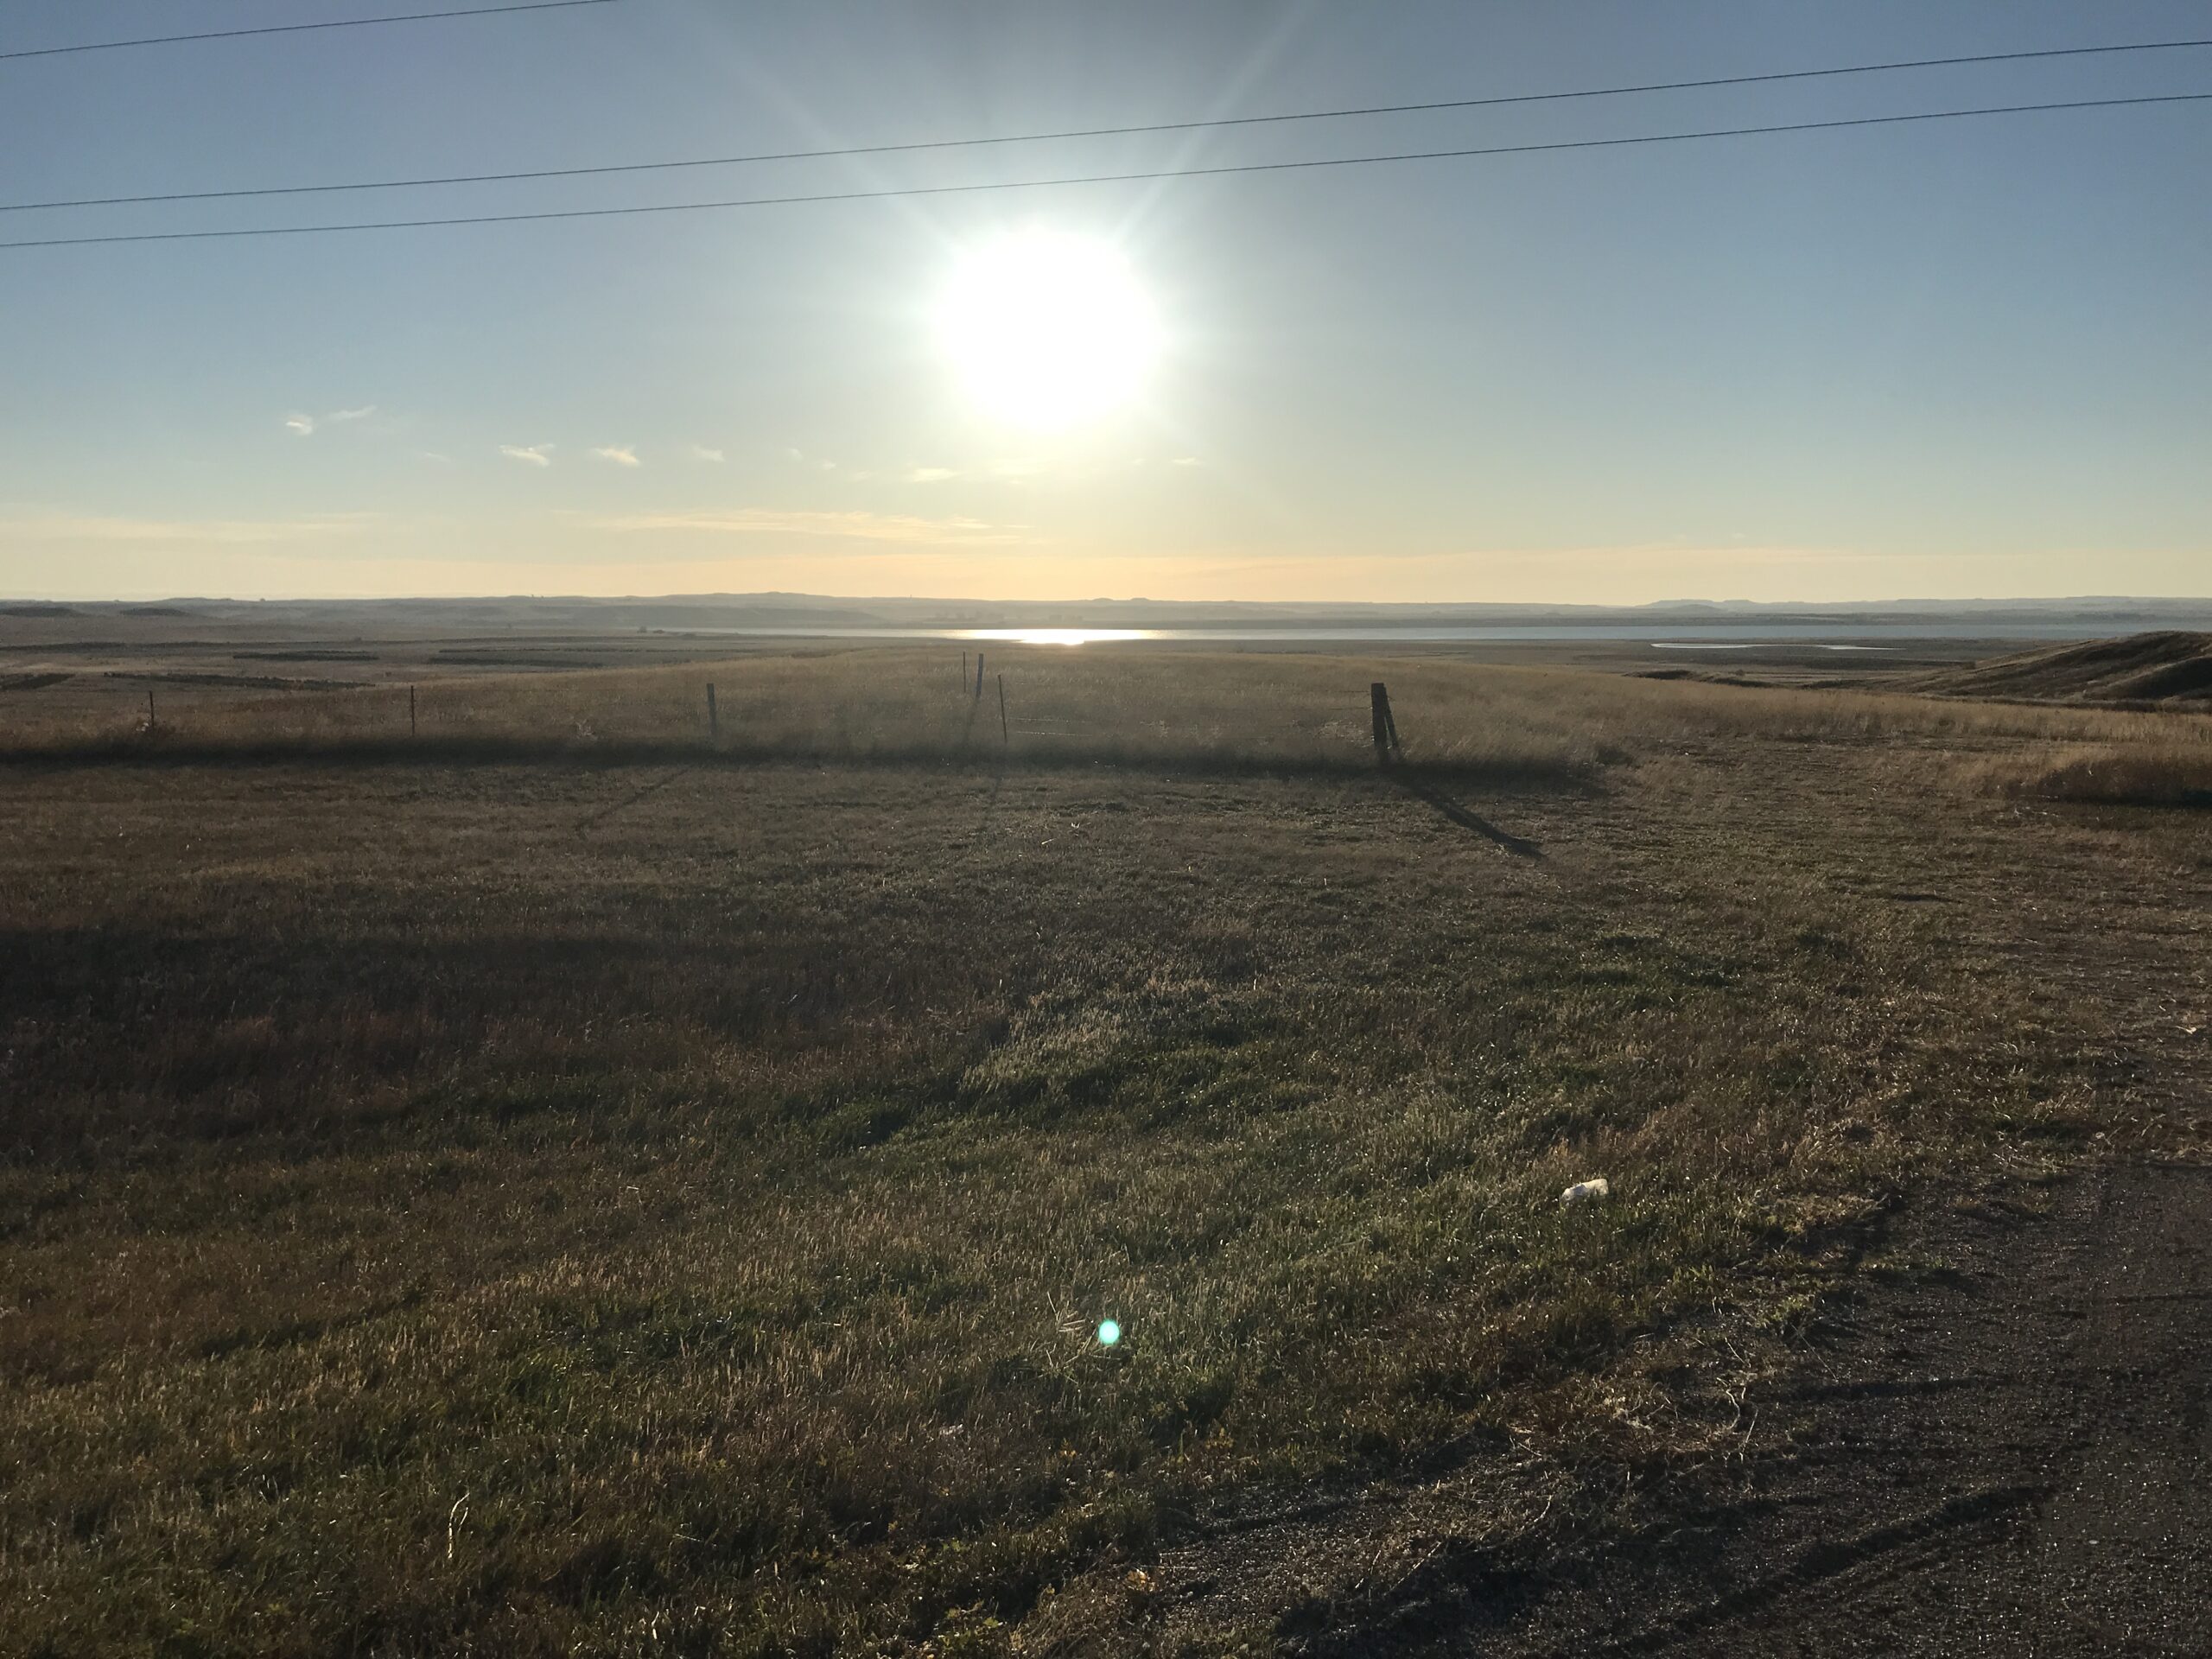 Wisdom Road Day 46: Sunday Morning On the Standing Rock